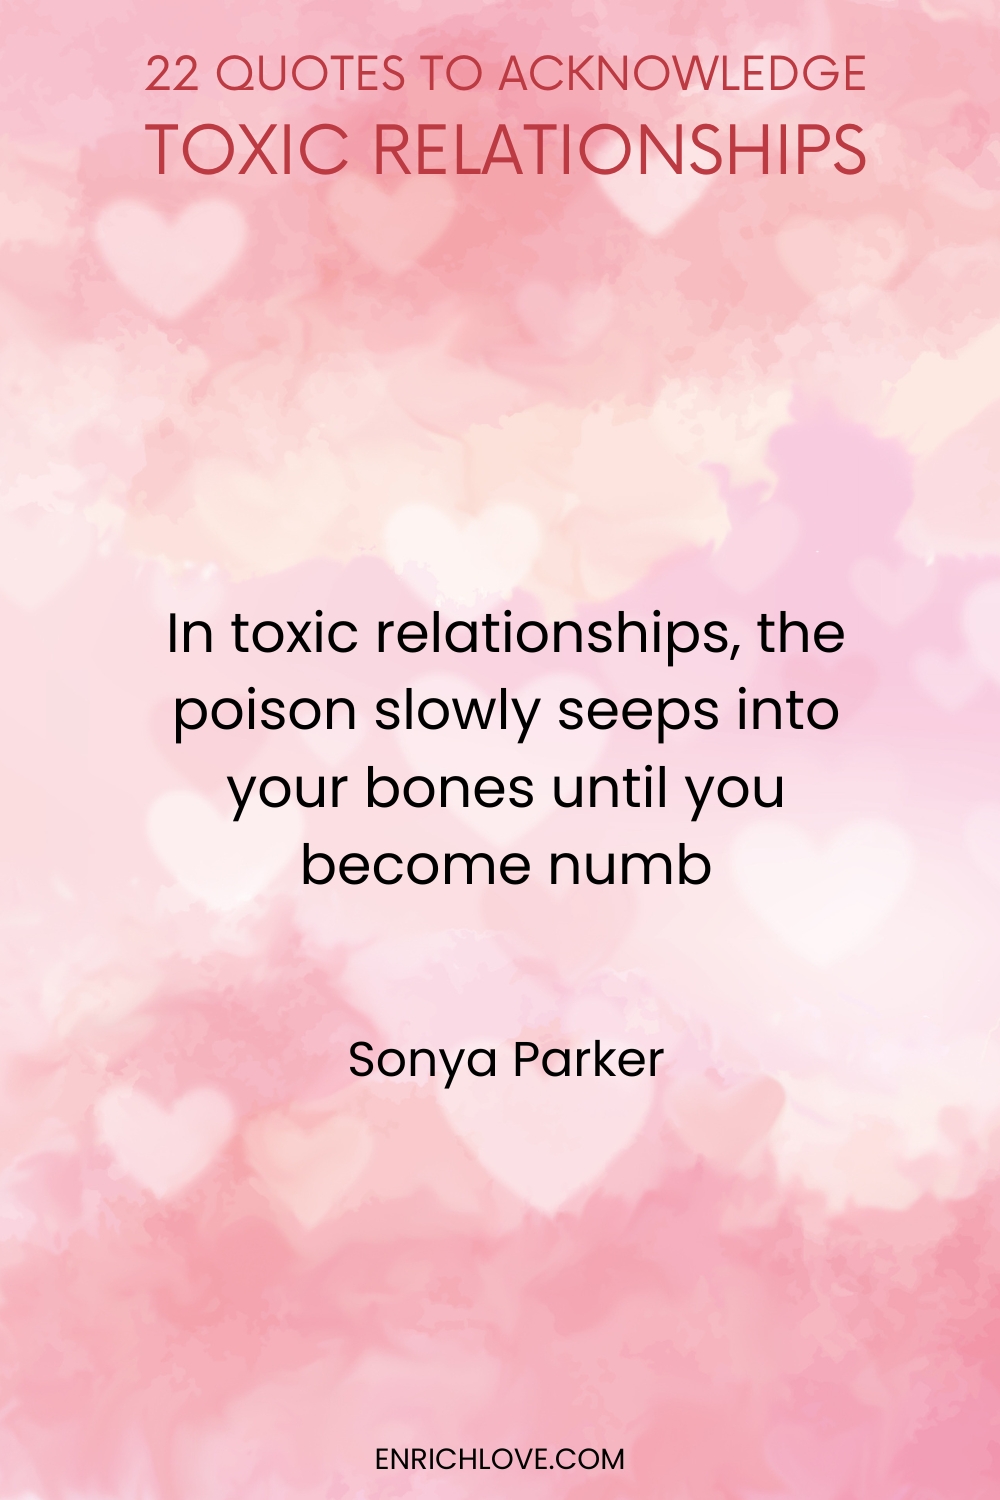 22 Quotes to Acknowledge Toxic Relationships -In toxic relationships, the poison slowly seeps into your bones until you become numb by Sonya Parker